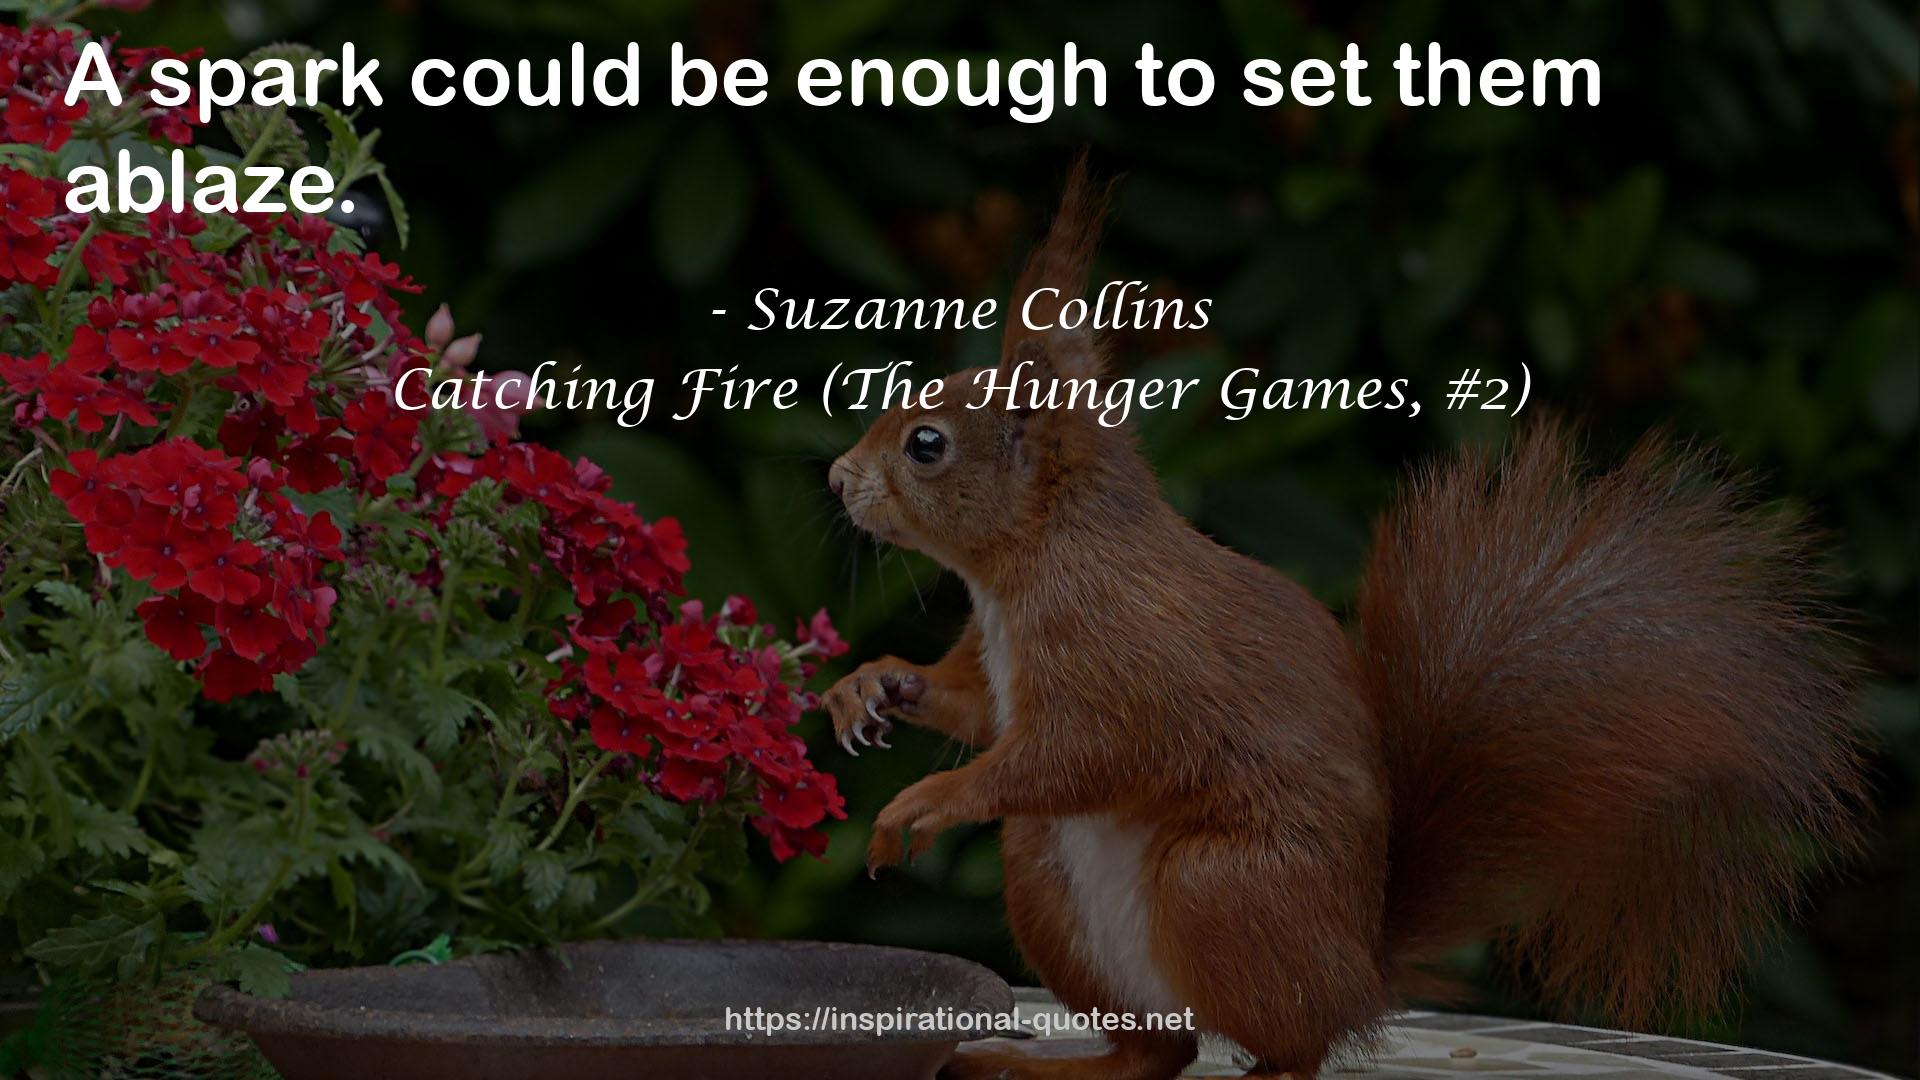 Catching Fire (The Hunger Games, #2) QUOTES